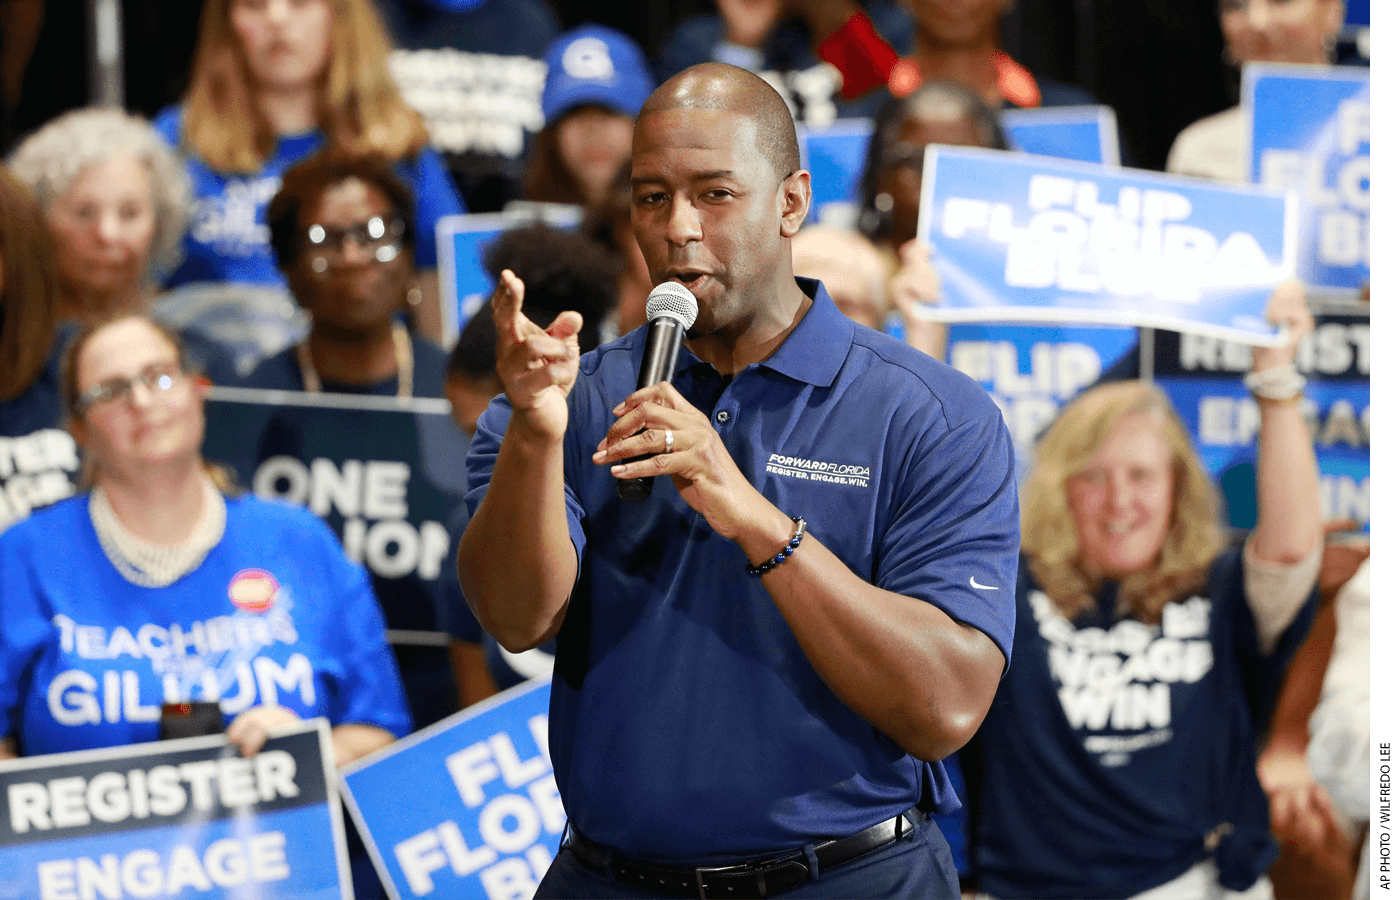 Andrew Gillum’s narrow loss to DeSantis in the 2018 governor’s race was partly due to the Democrat’s opposition to school choice.